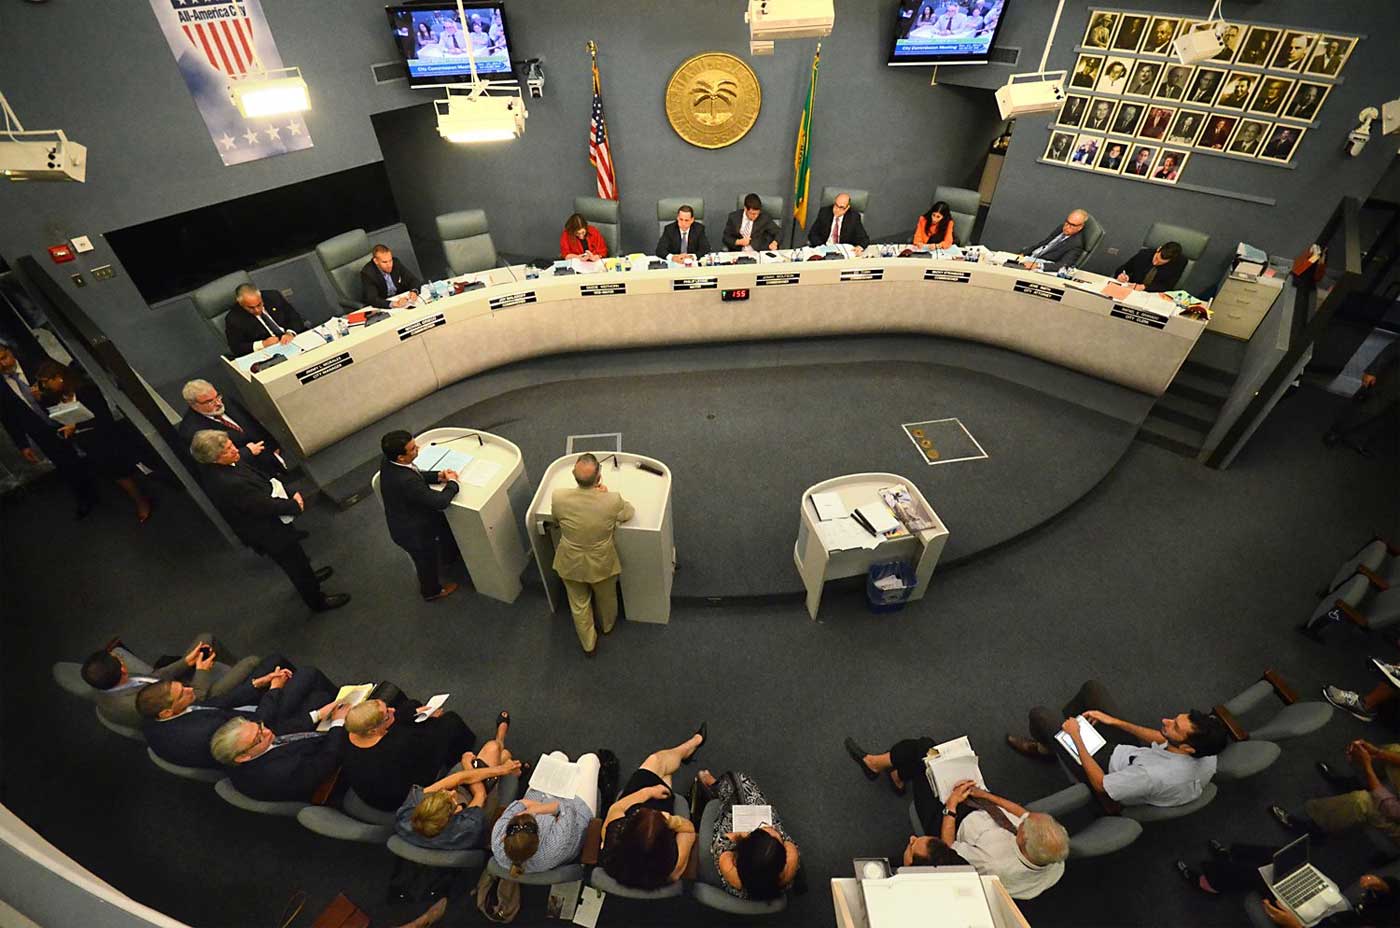 Eight candidates, some very familiar to voters, vie for two Miami Beach Commission seats